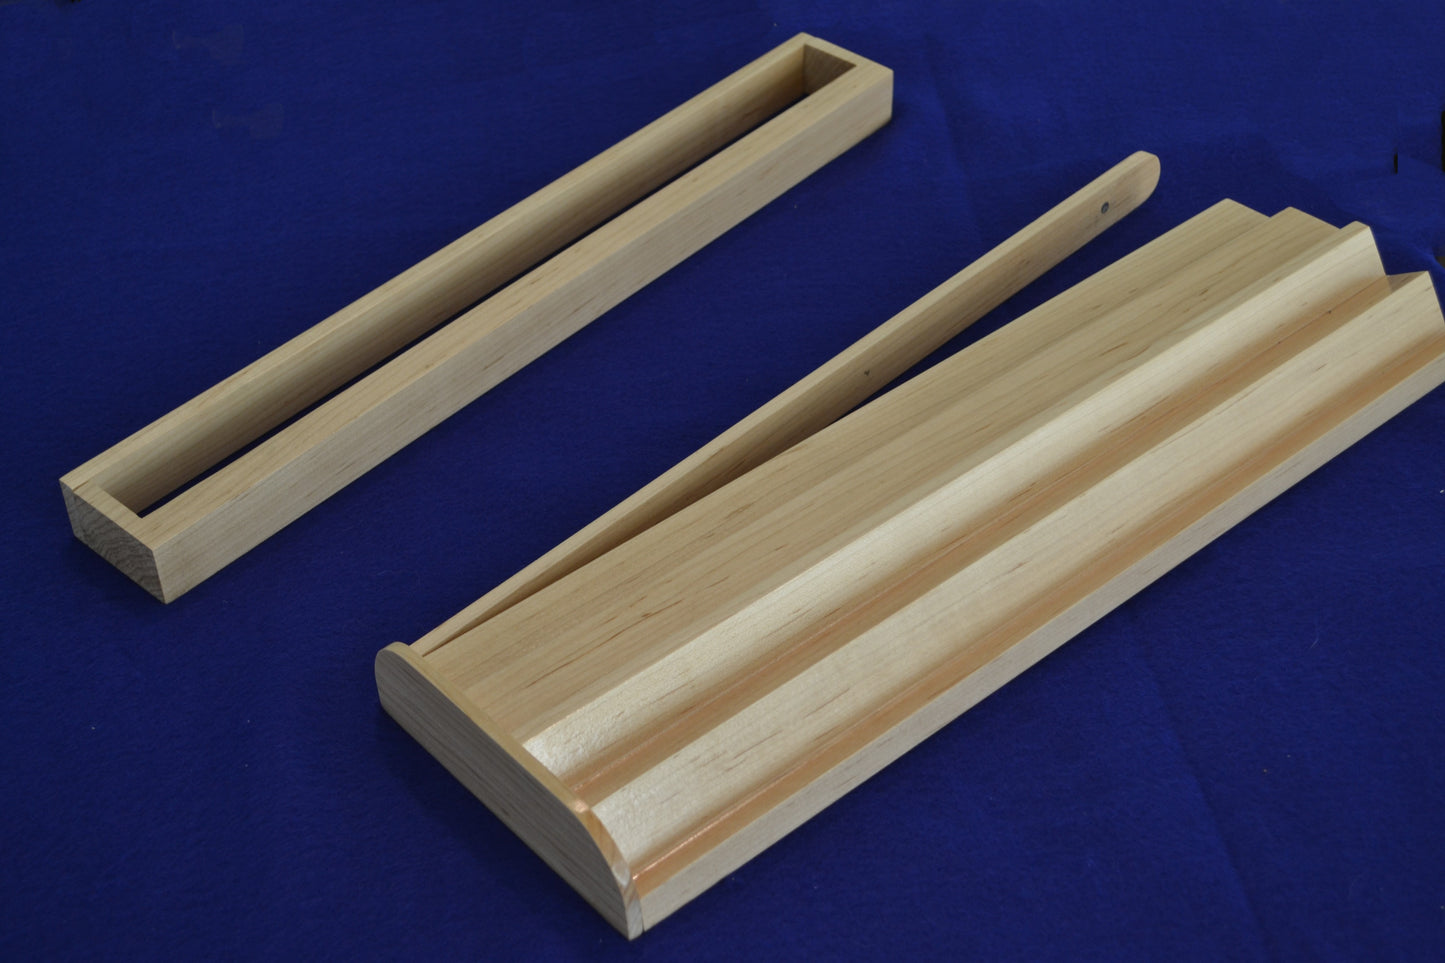 Twosome Tile Racks for Automatic Table - Maple